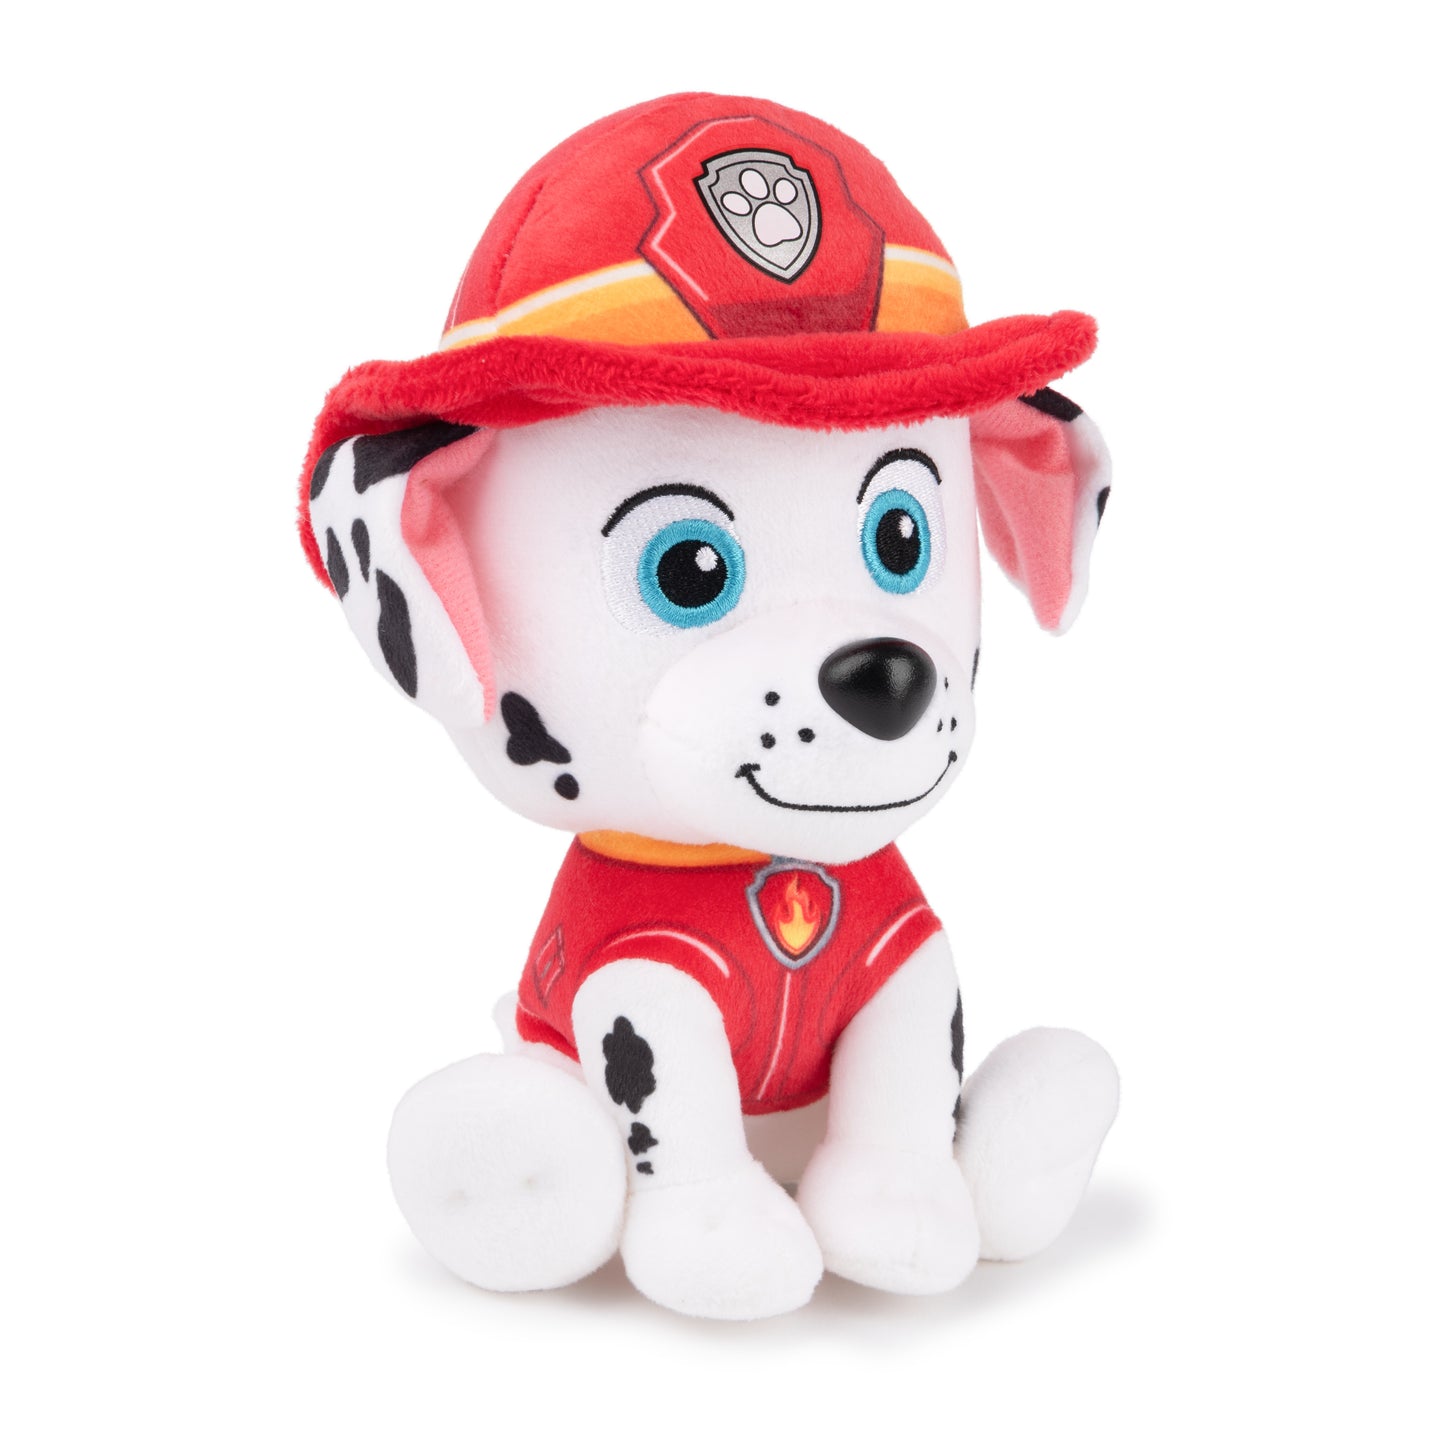 GUND Official PAW Patrol Marshall in Signature Firefighter Uniform Plush Toy, Stuffed Animal for Ages 1 and Up, 6"